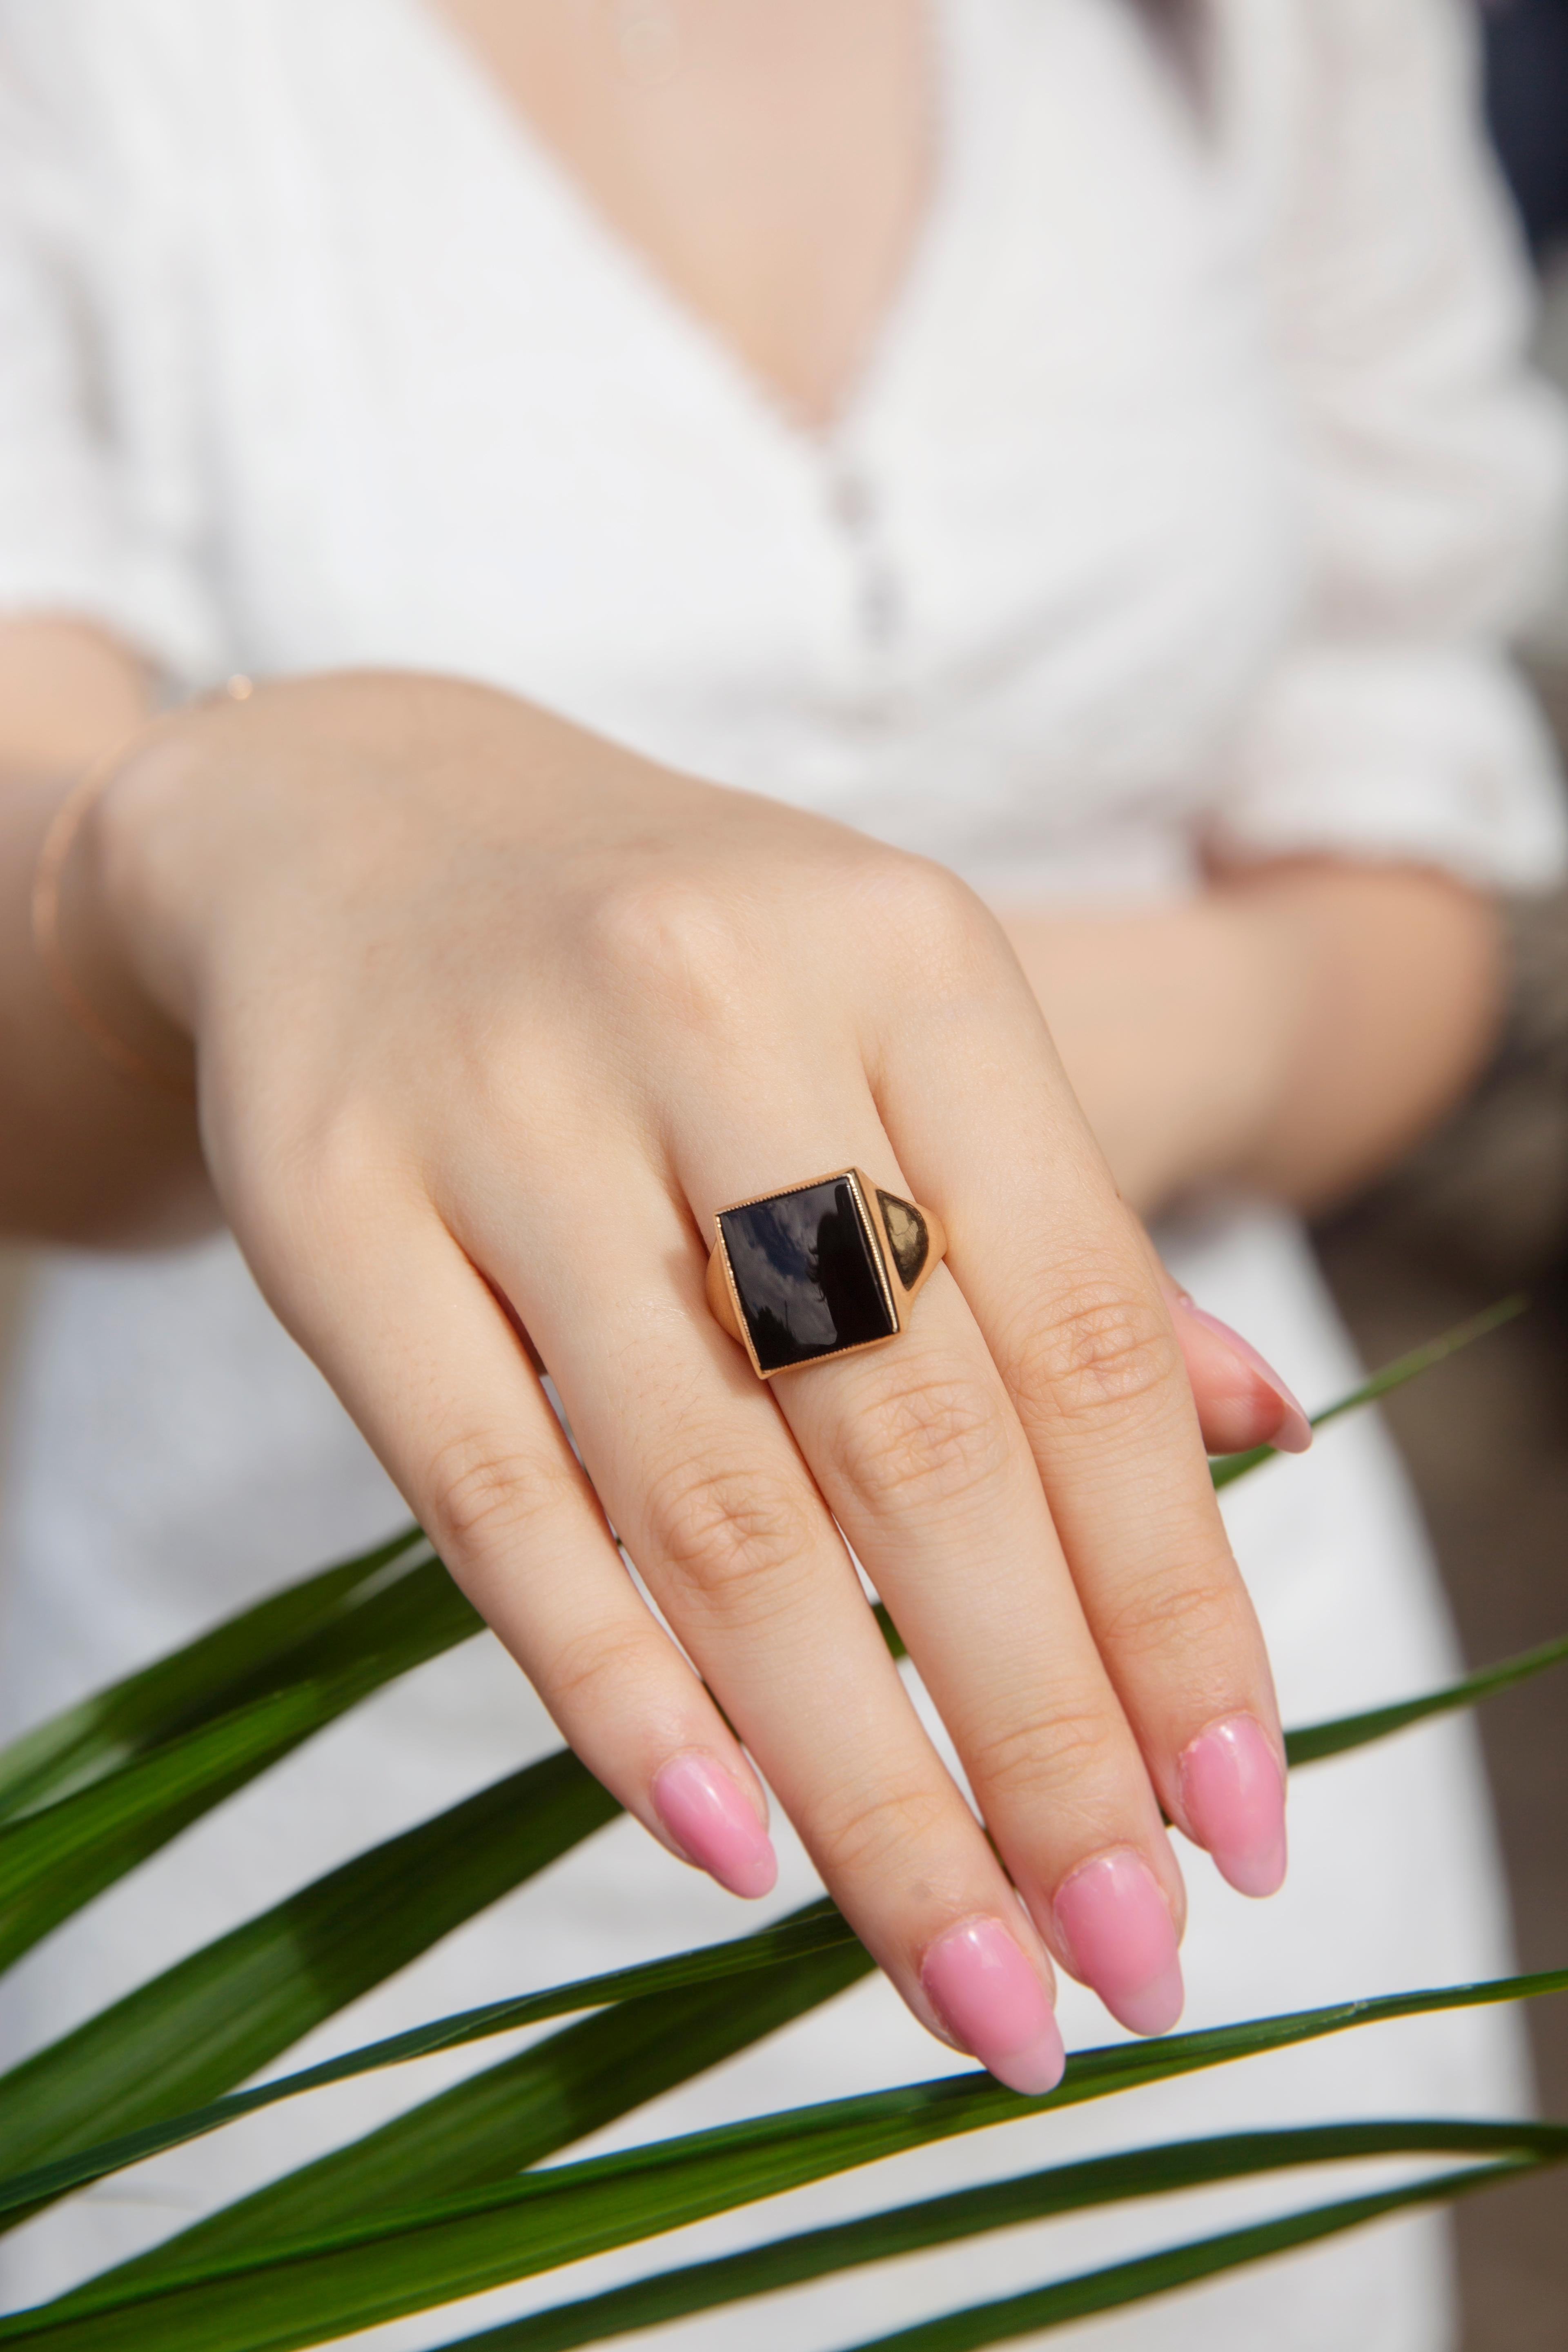 Crafted in 9 carat yellow gold, this handsome men's signet ring sees a high-polish flared band holding an opulent black rectangular buff-top onyx. We have named this debonair splendour The Rodney Ring. She slips on comfortably with a low profile, a